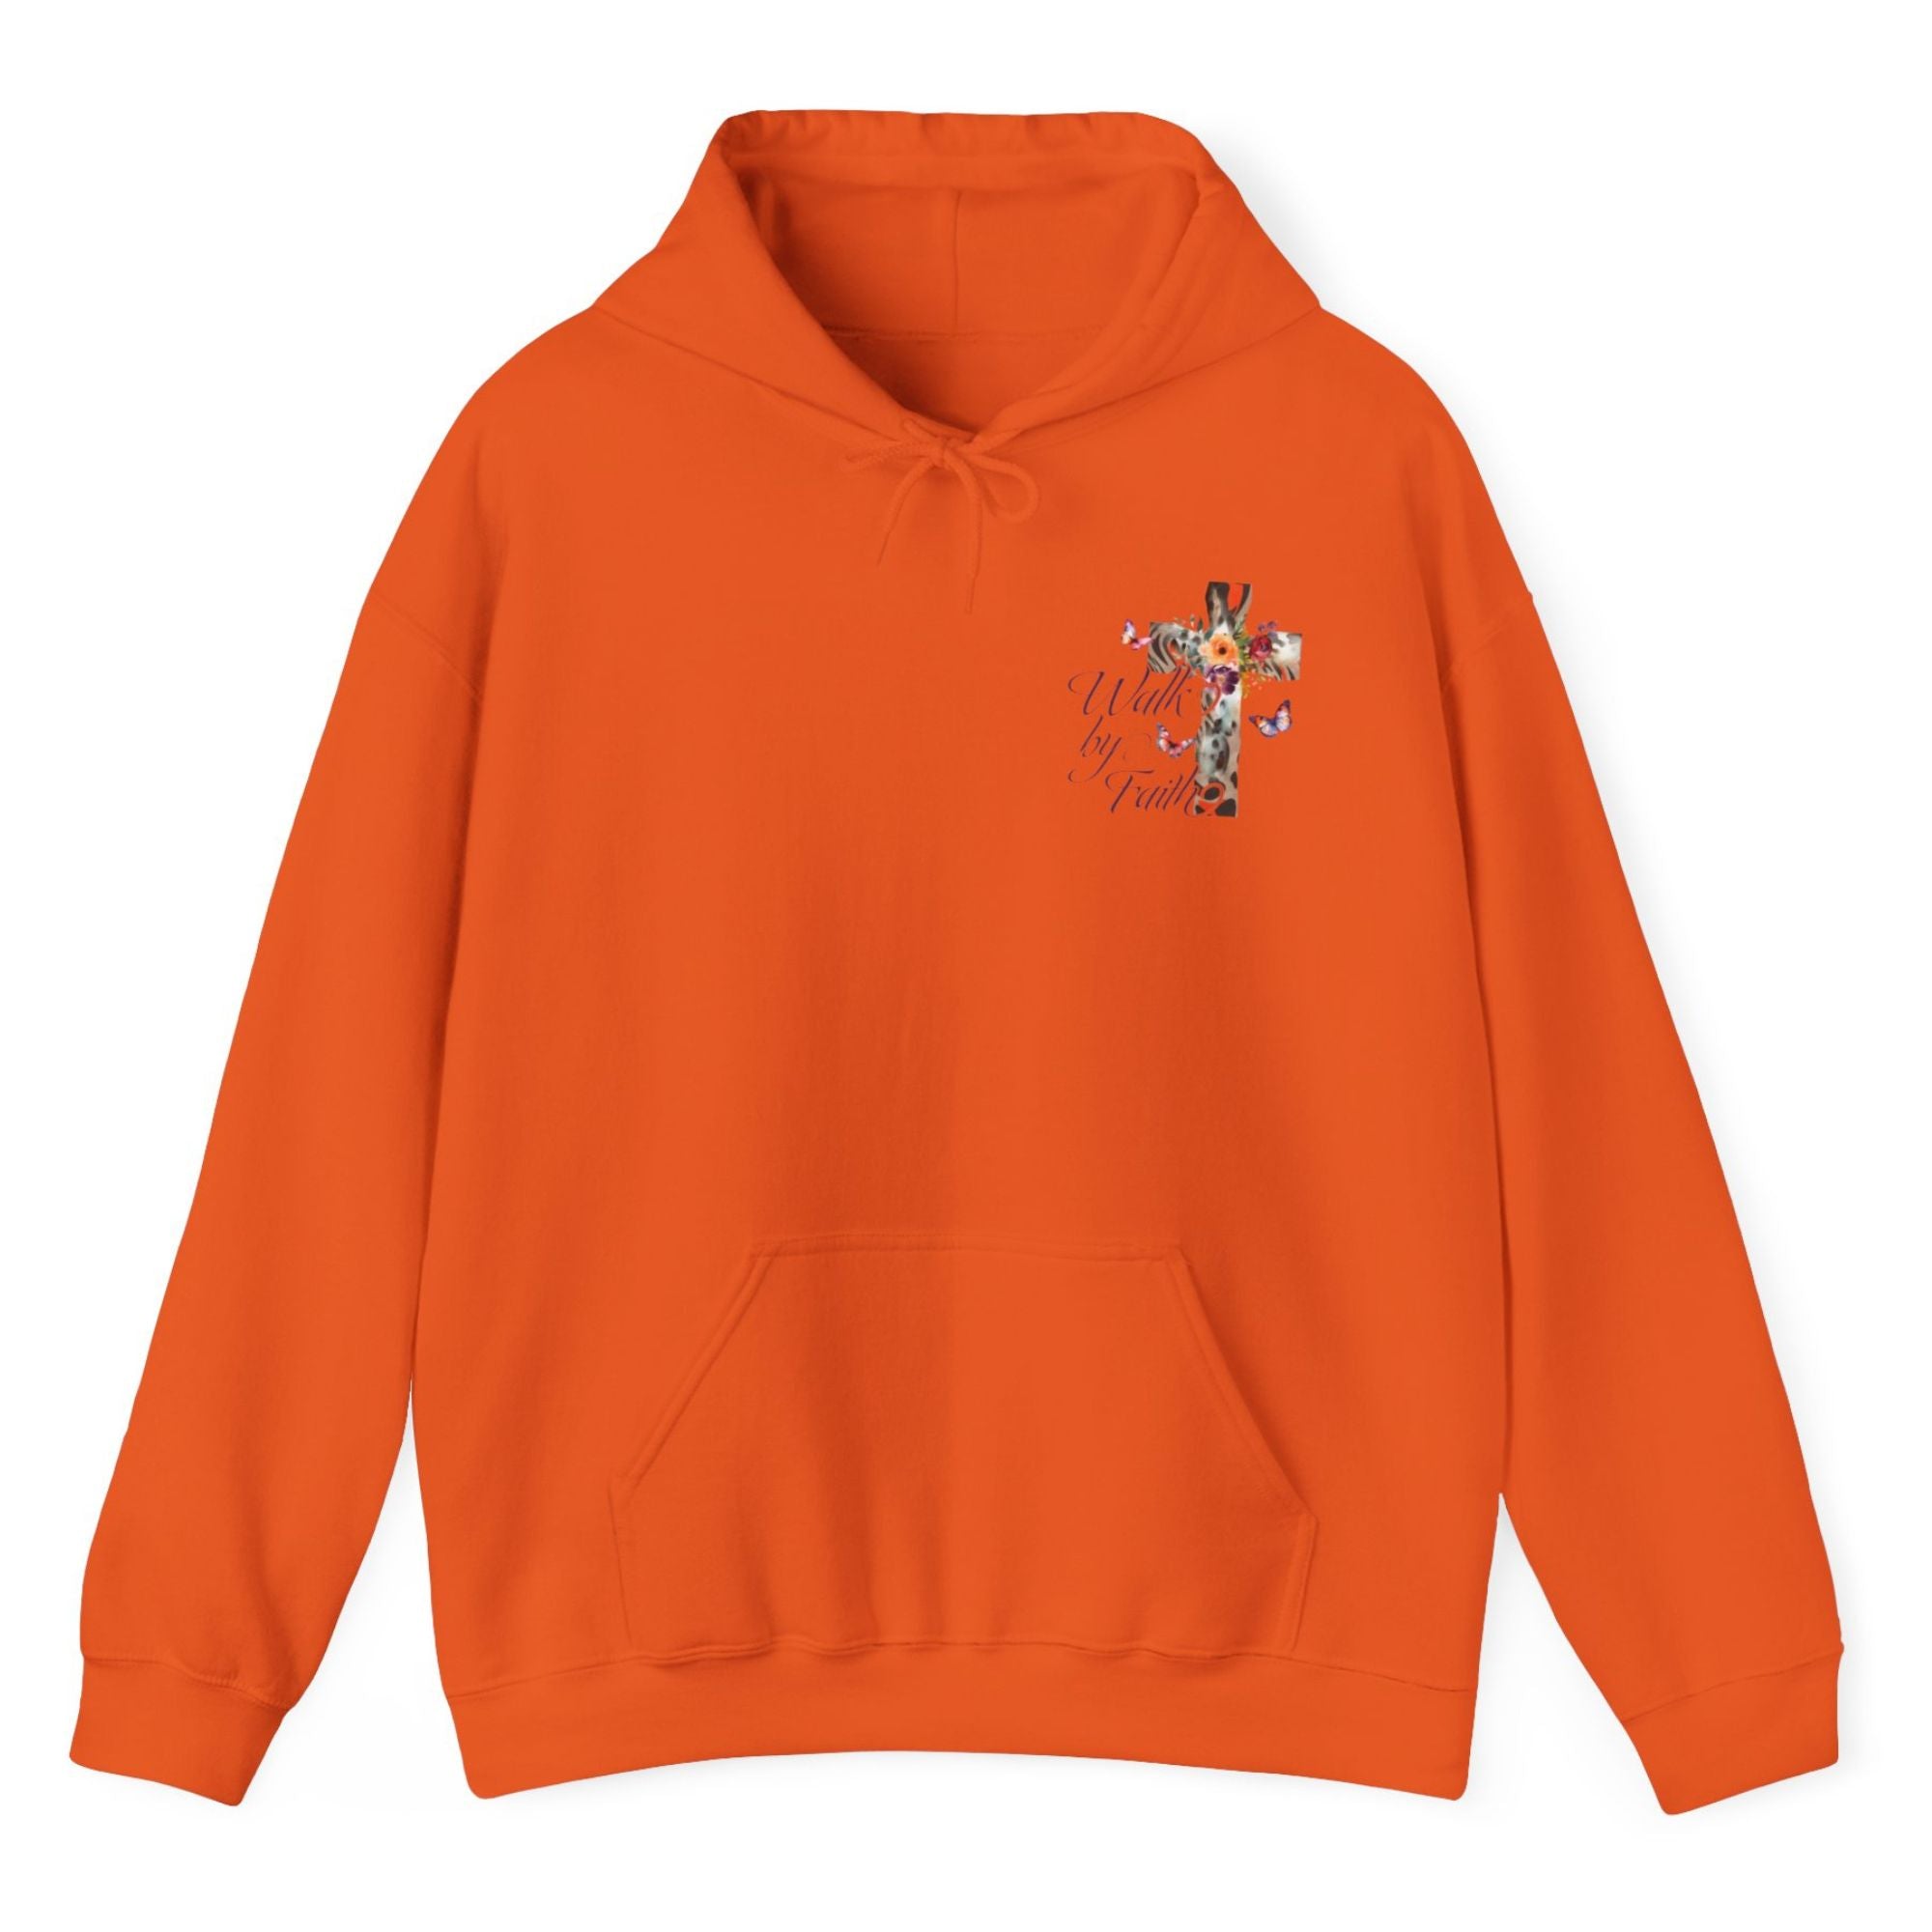 Walk by Faith Butterfly Cross Unisex-Fit Hoodie Colors: Orange Sizes: S Jesus Passion Apparel